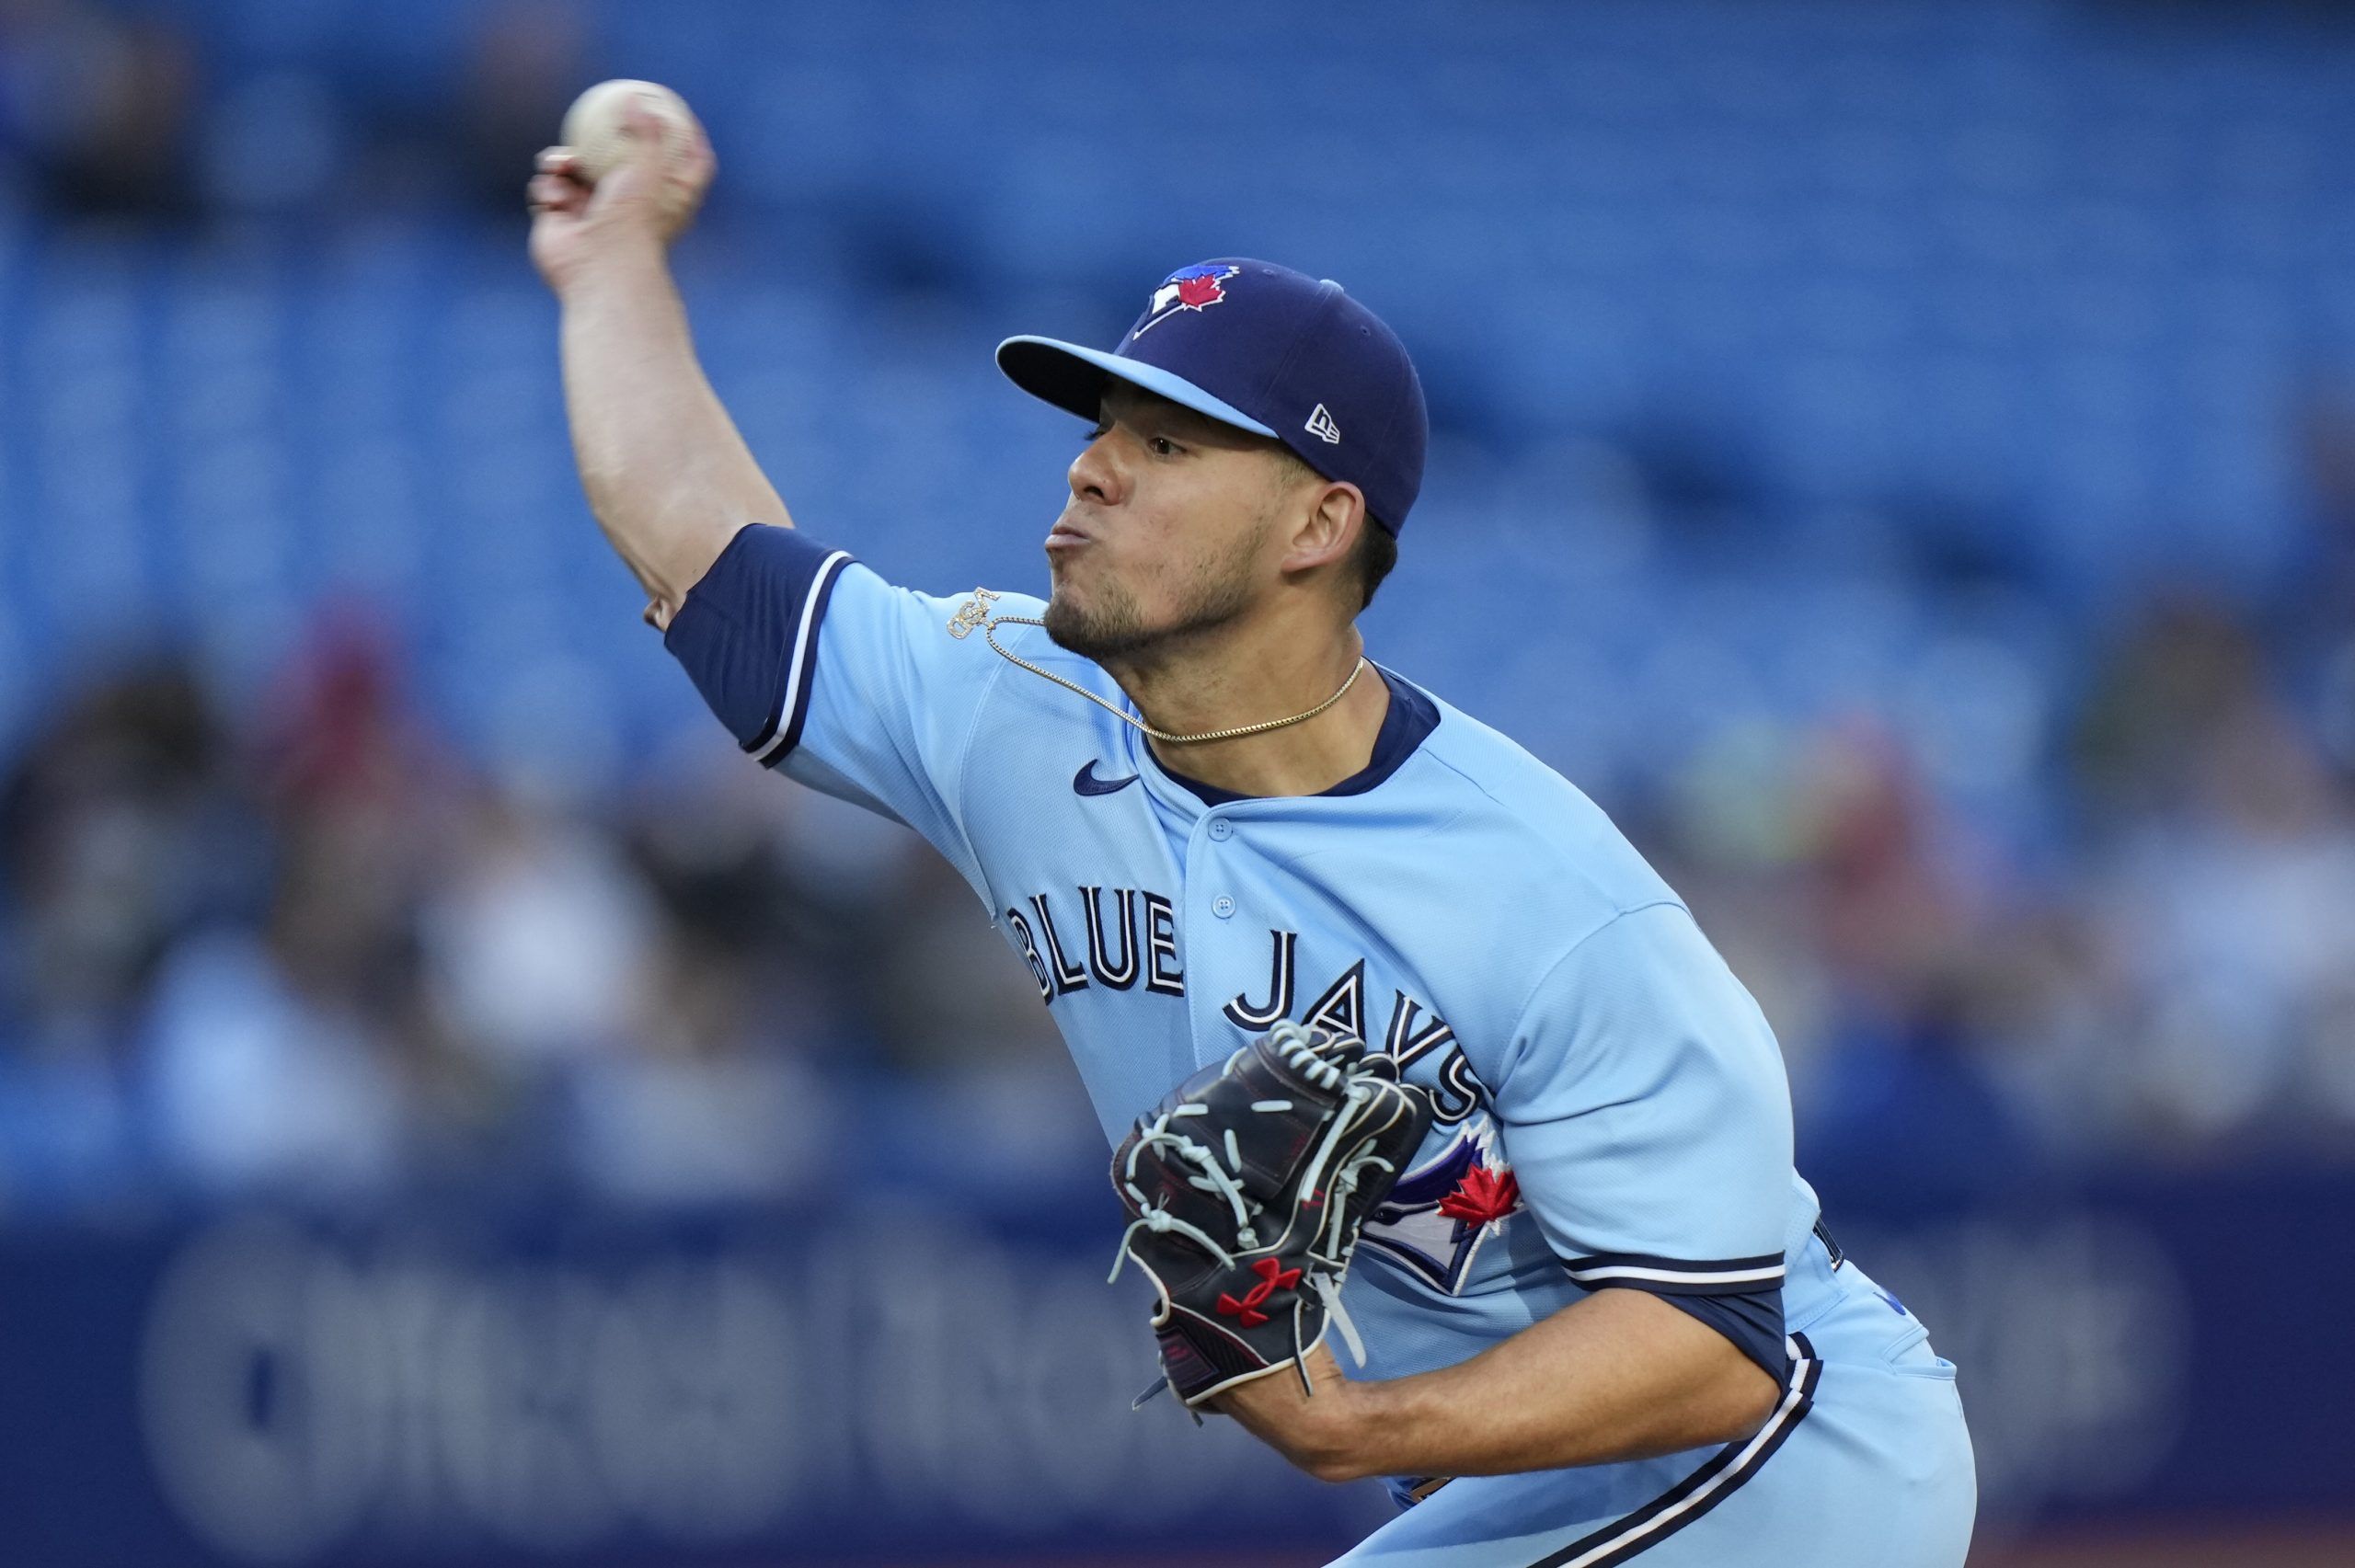 Blue Jays Reliever Jordan Romano exited tonight's All-Star Game